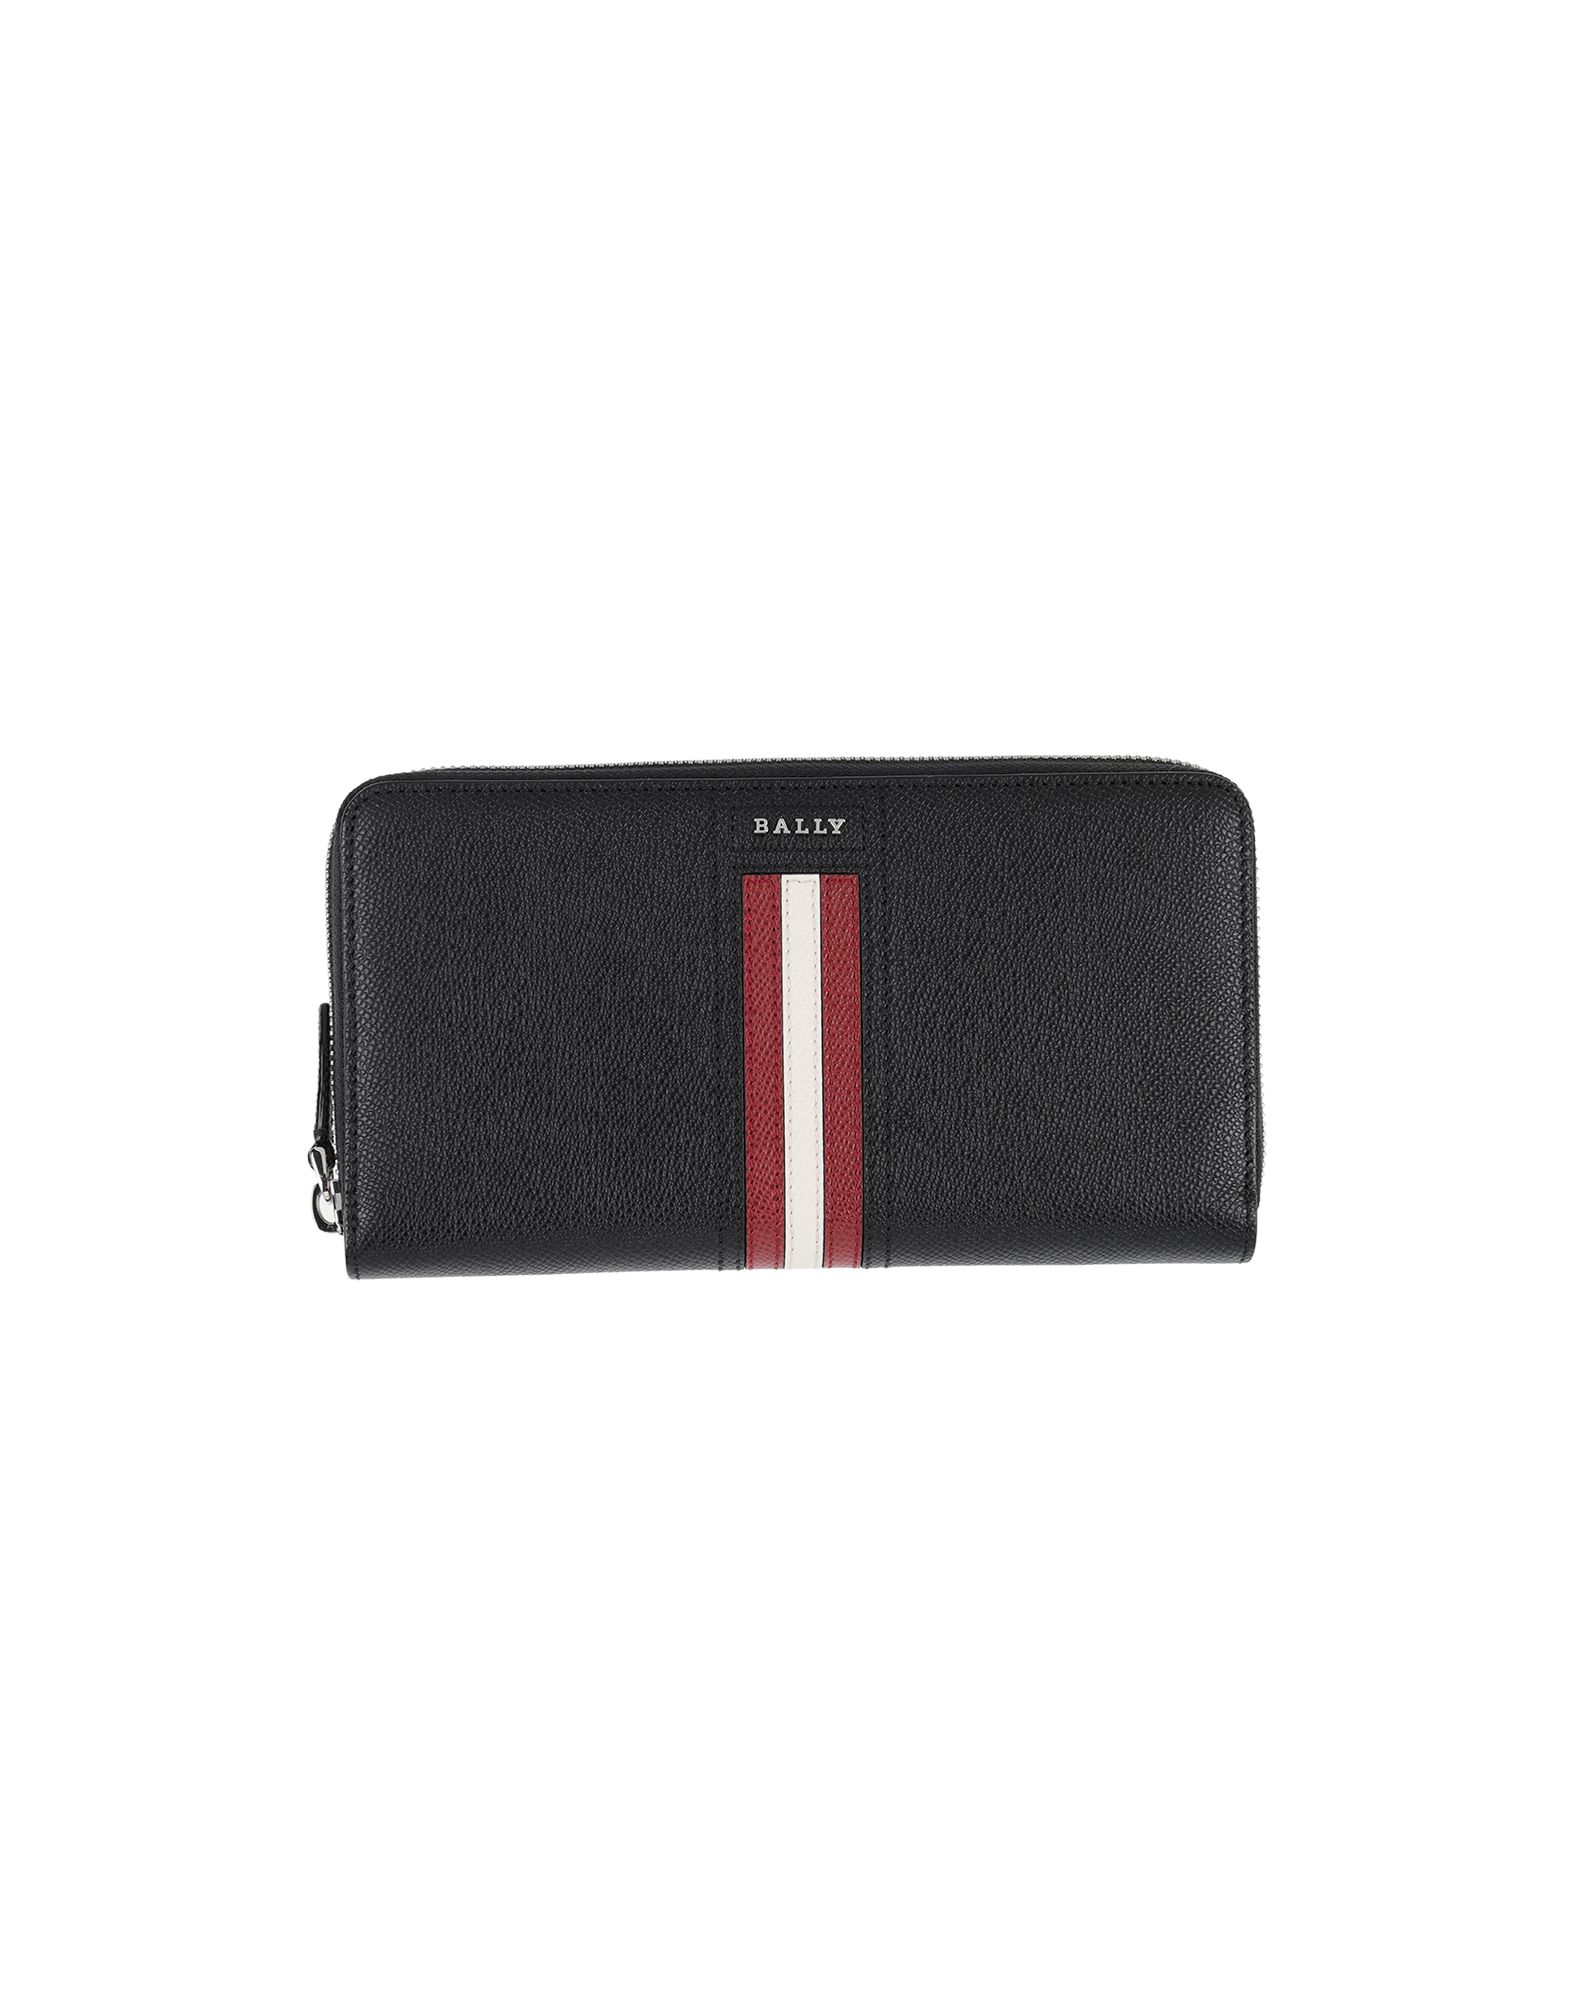 textured leather, solid color, logo, zip, leather lining, internal card slots, contains non-textile 